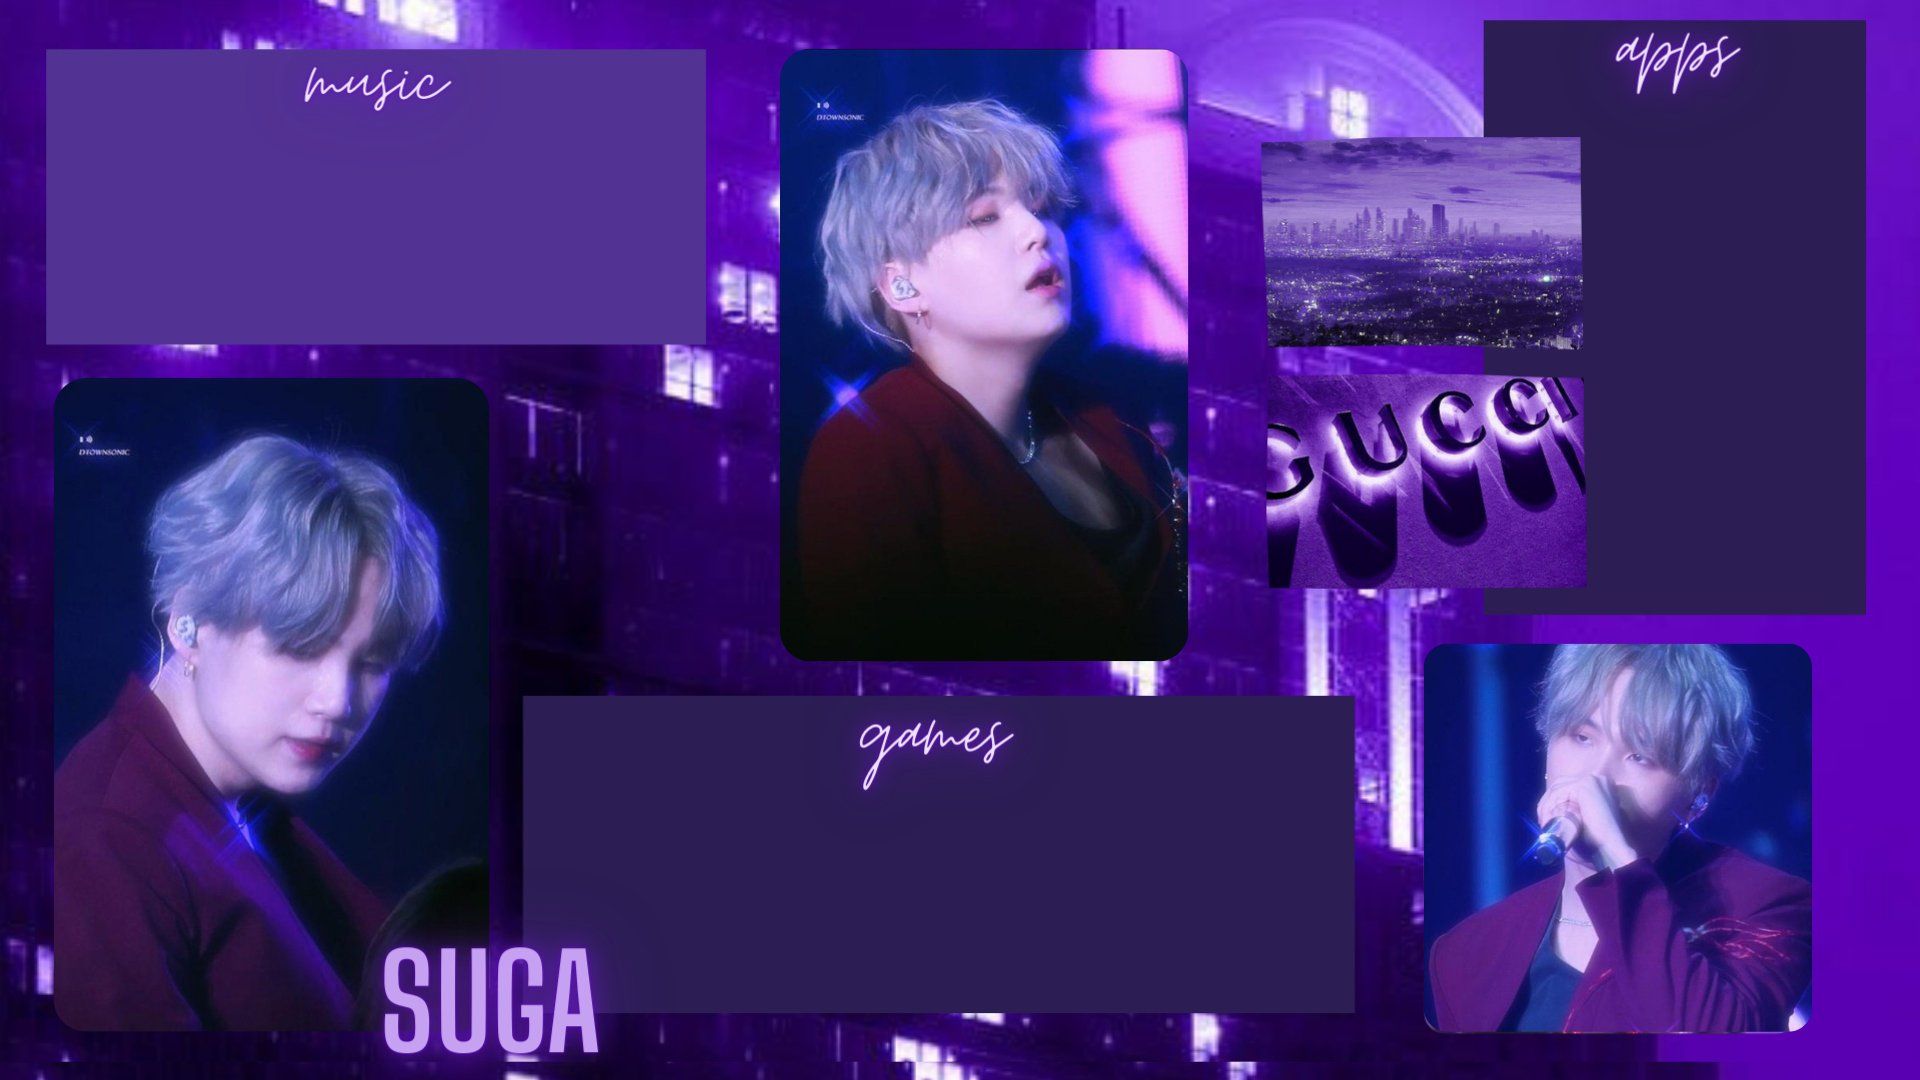 A purple BTS suga wallpaper with 5 different pictures of suga. - Suga